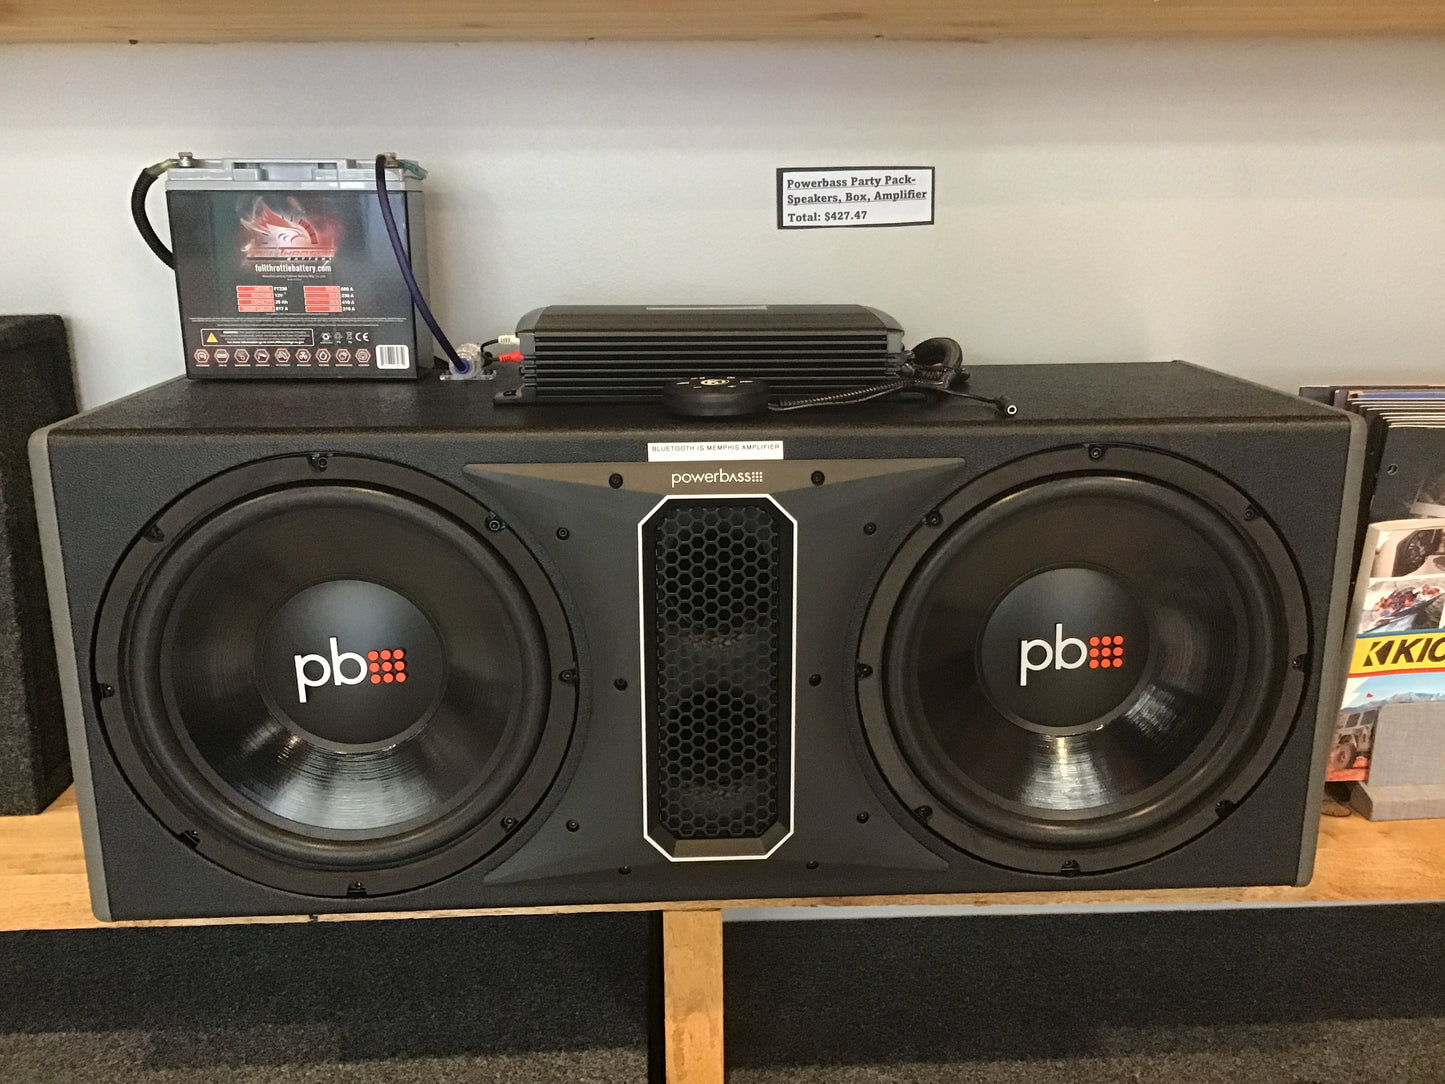 Powerbass Party Pack- Speakers, Box, Amplifer